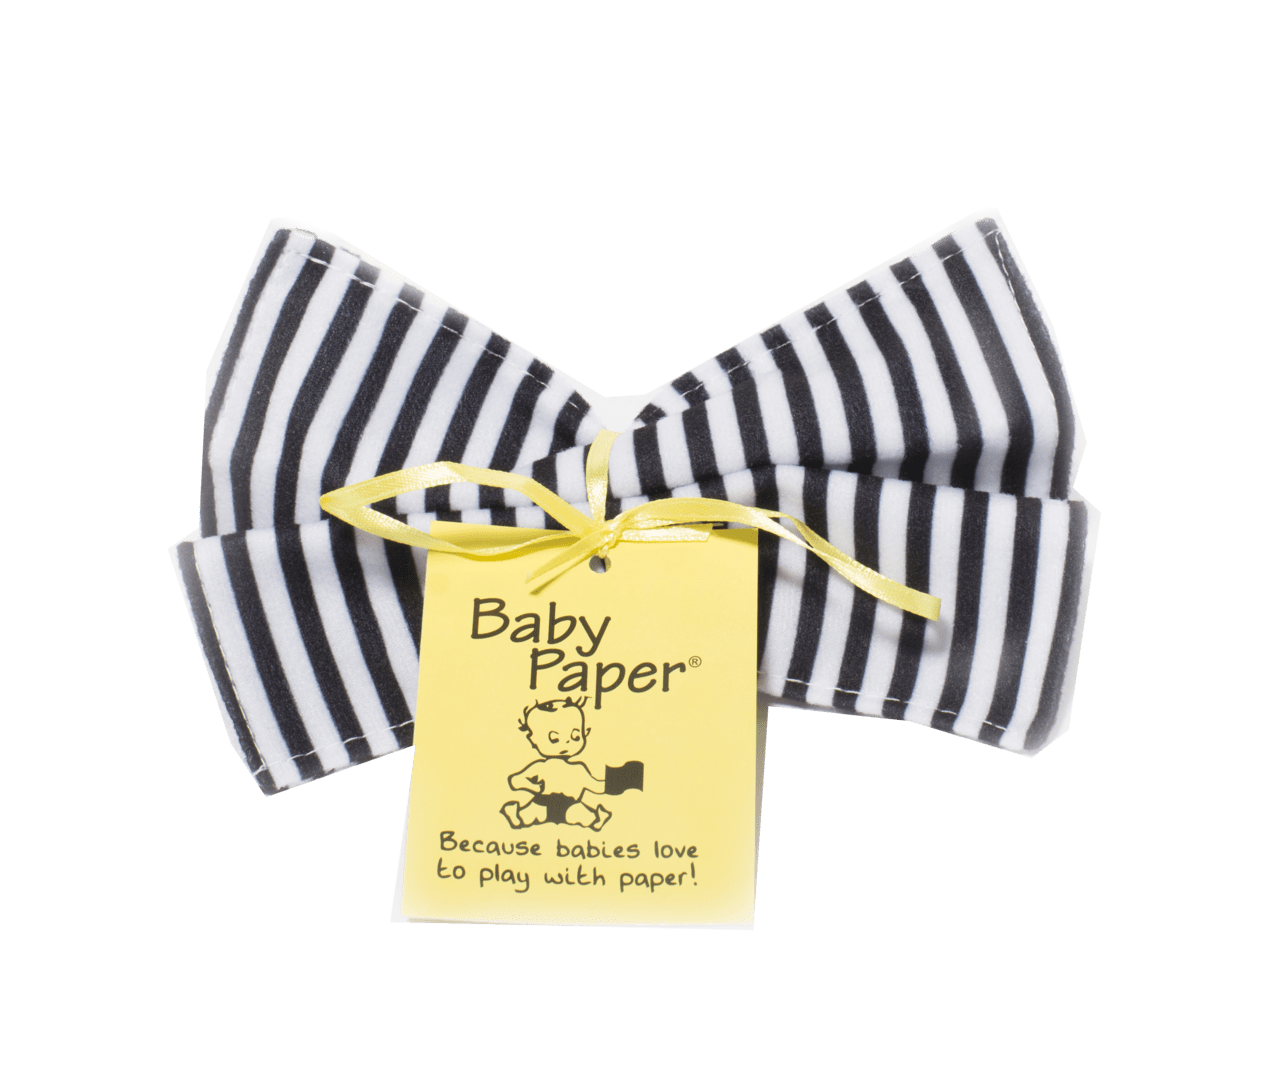 Baby Paper baby paper Black and White Stripe - Baby Paper Baby Paper